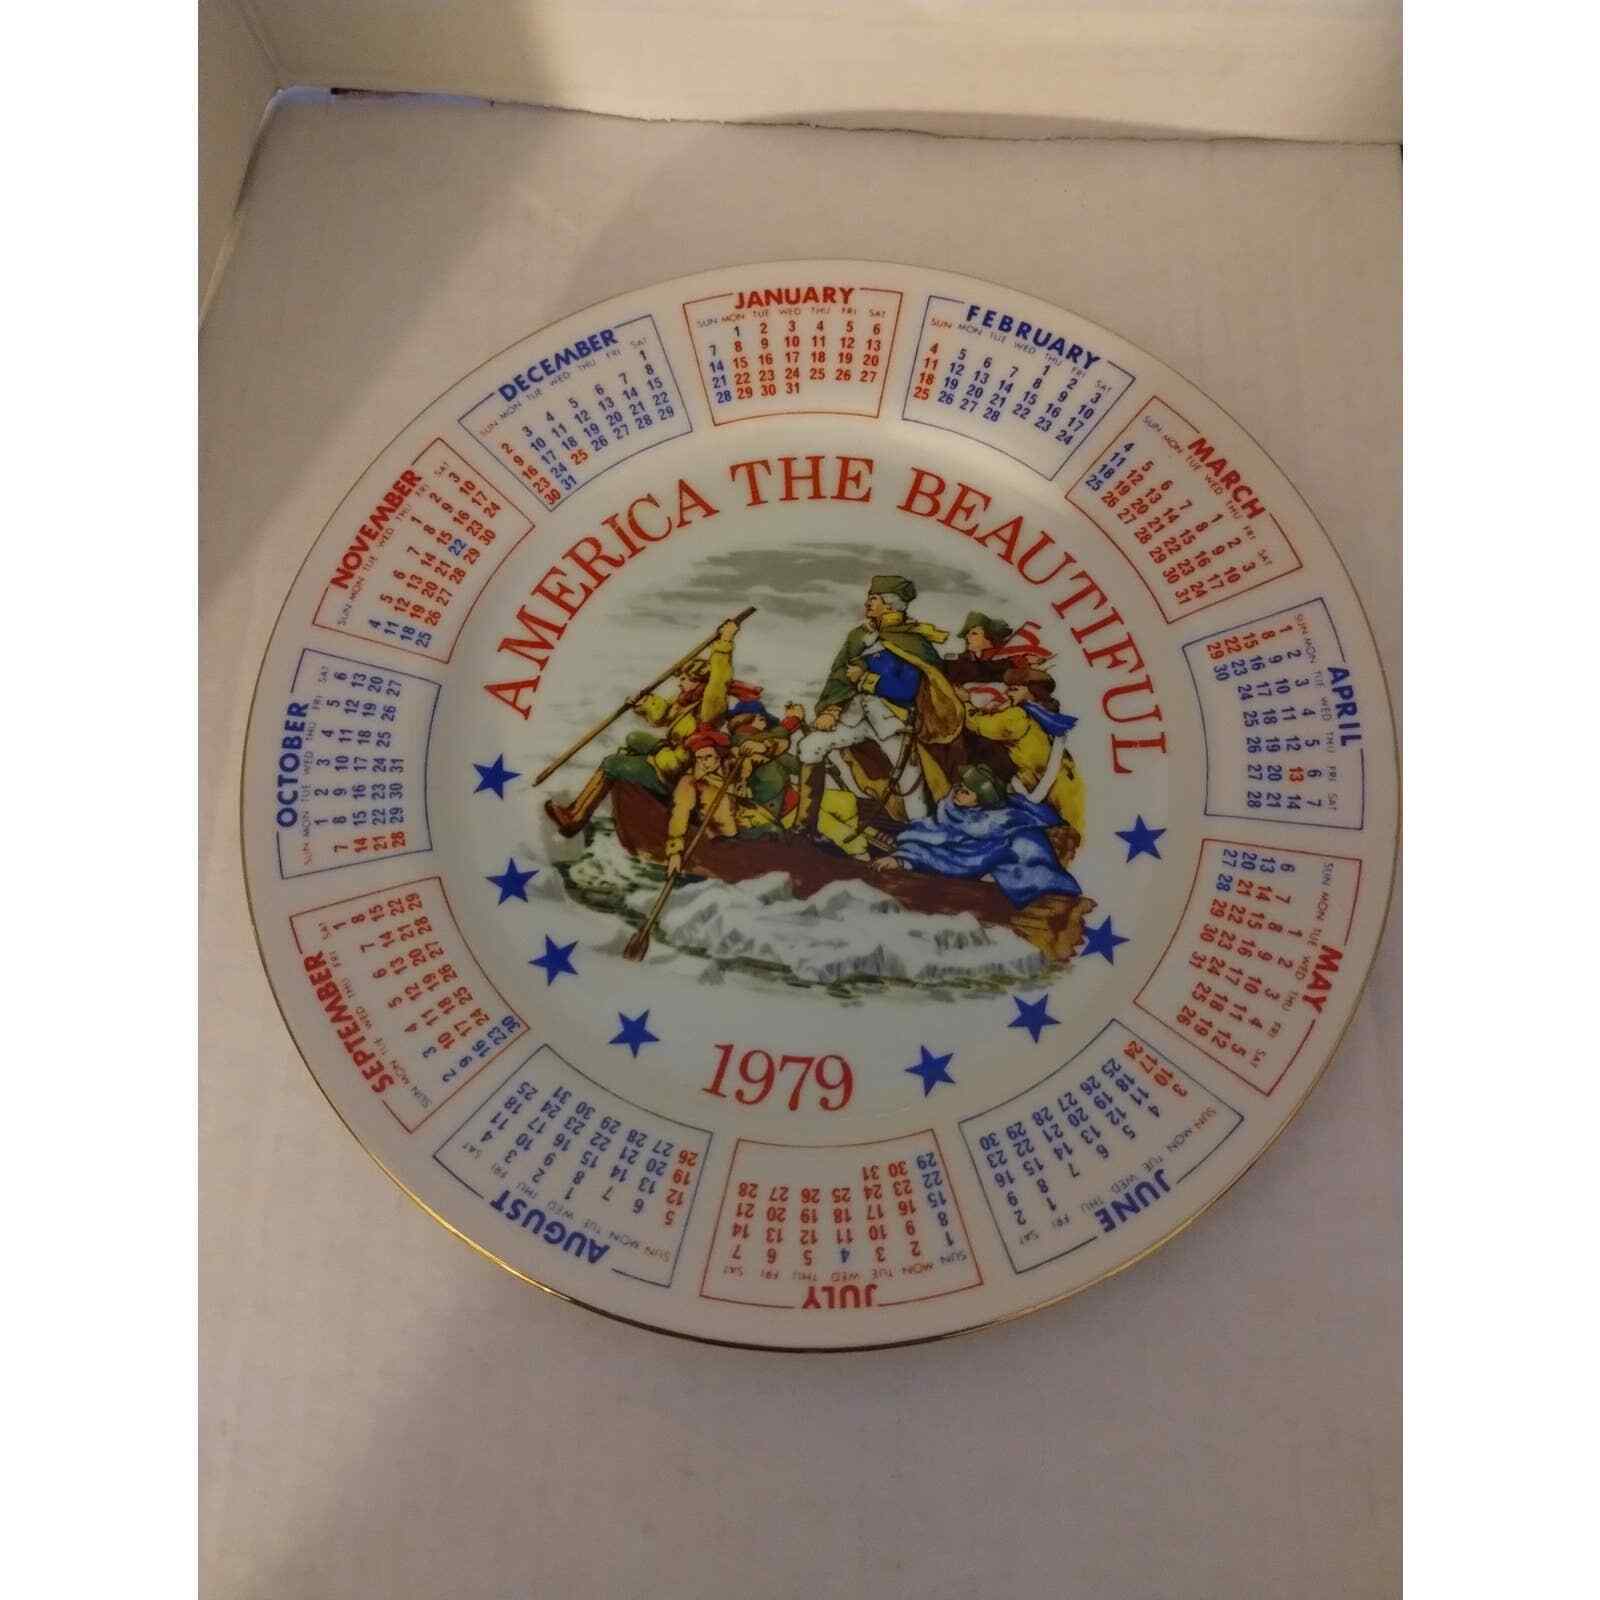 1979 America The Beautiful Collector Plate Spencer Gifts 1978 Calendar Series IV